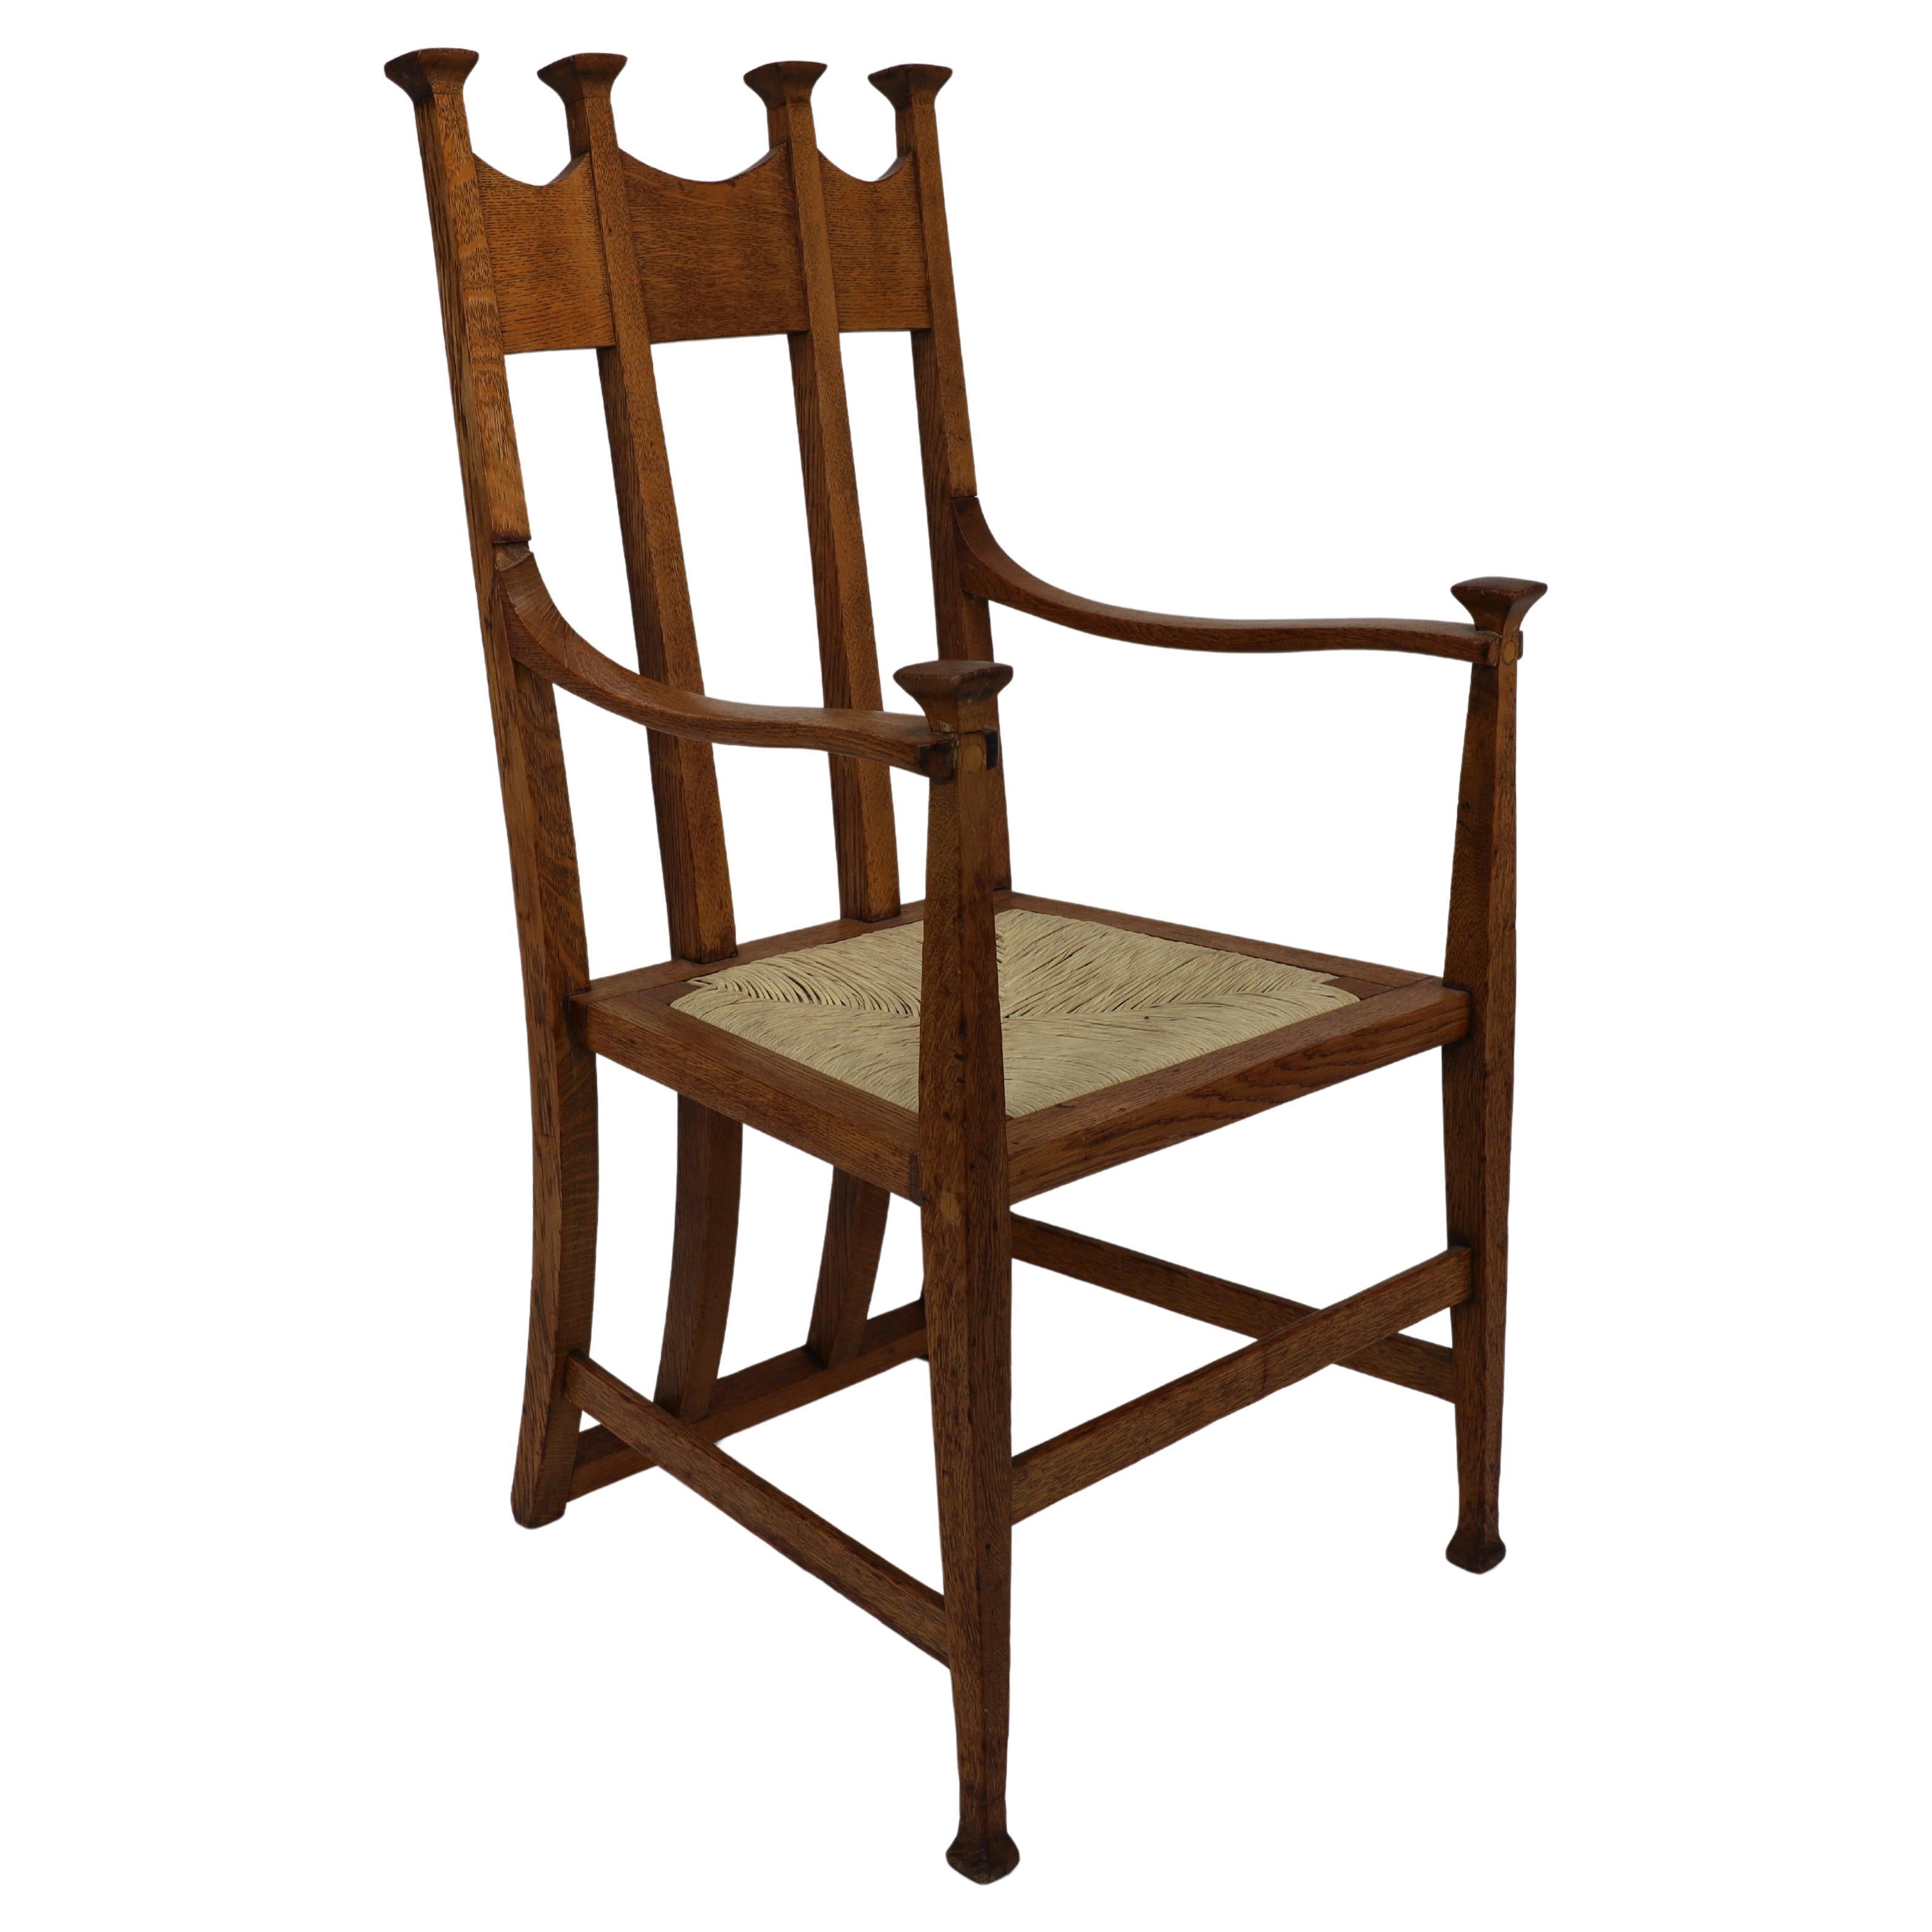 J S Henry Arts & Crafts oak dining chair with throne like caps & a sweeping back For Sale